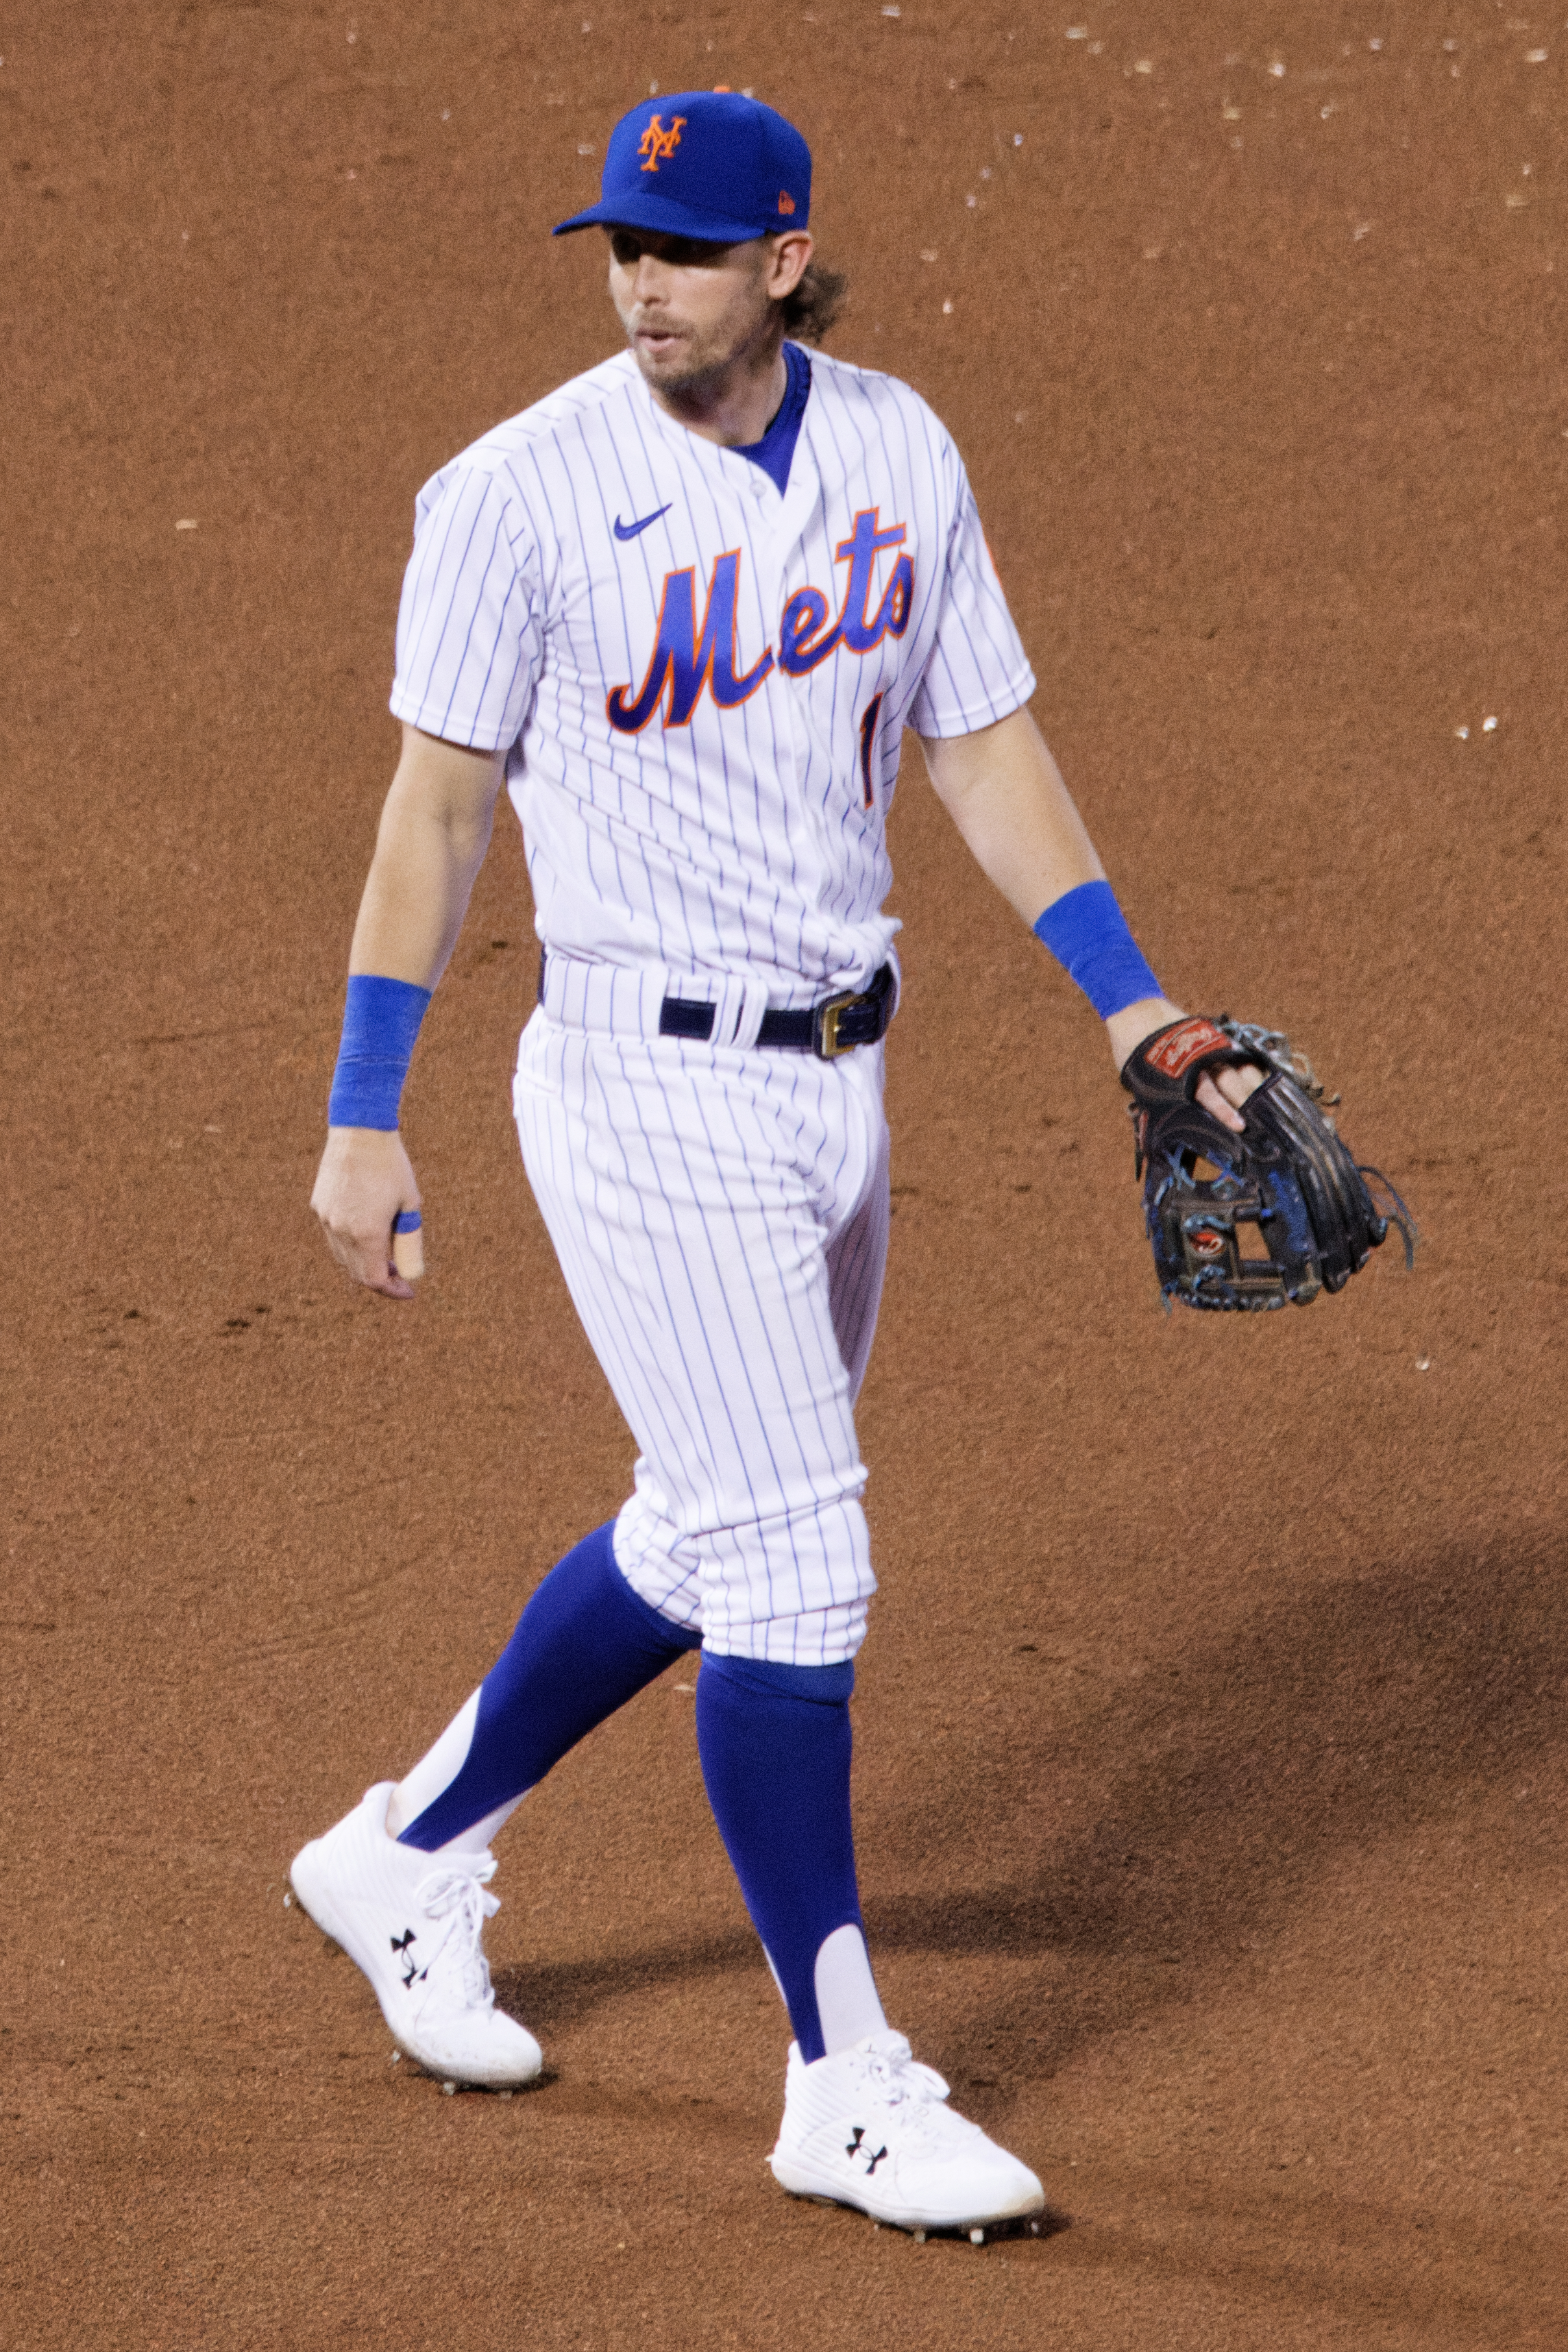 File:Jeff McNeil in the field as second baseman, Aug 27 2022 (cropped).jpg  - Wikipedia